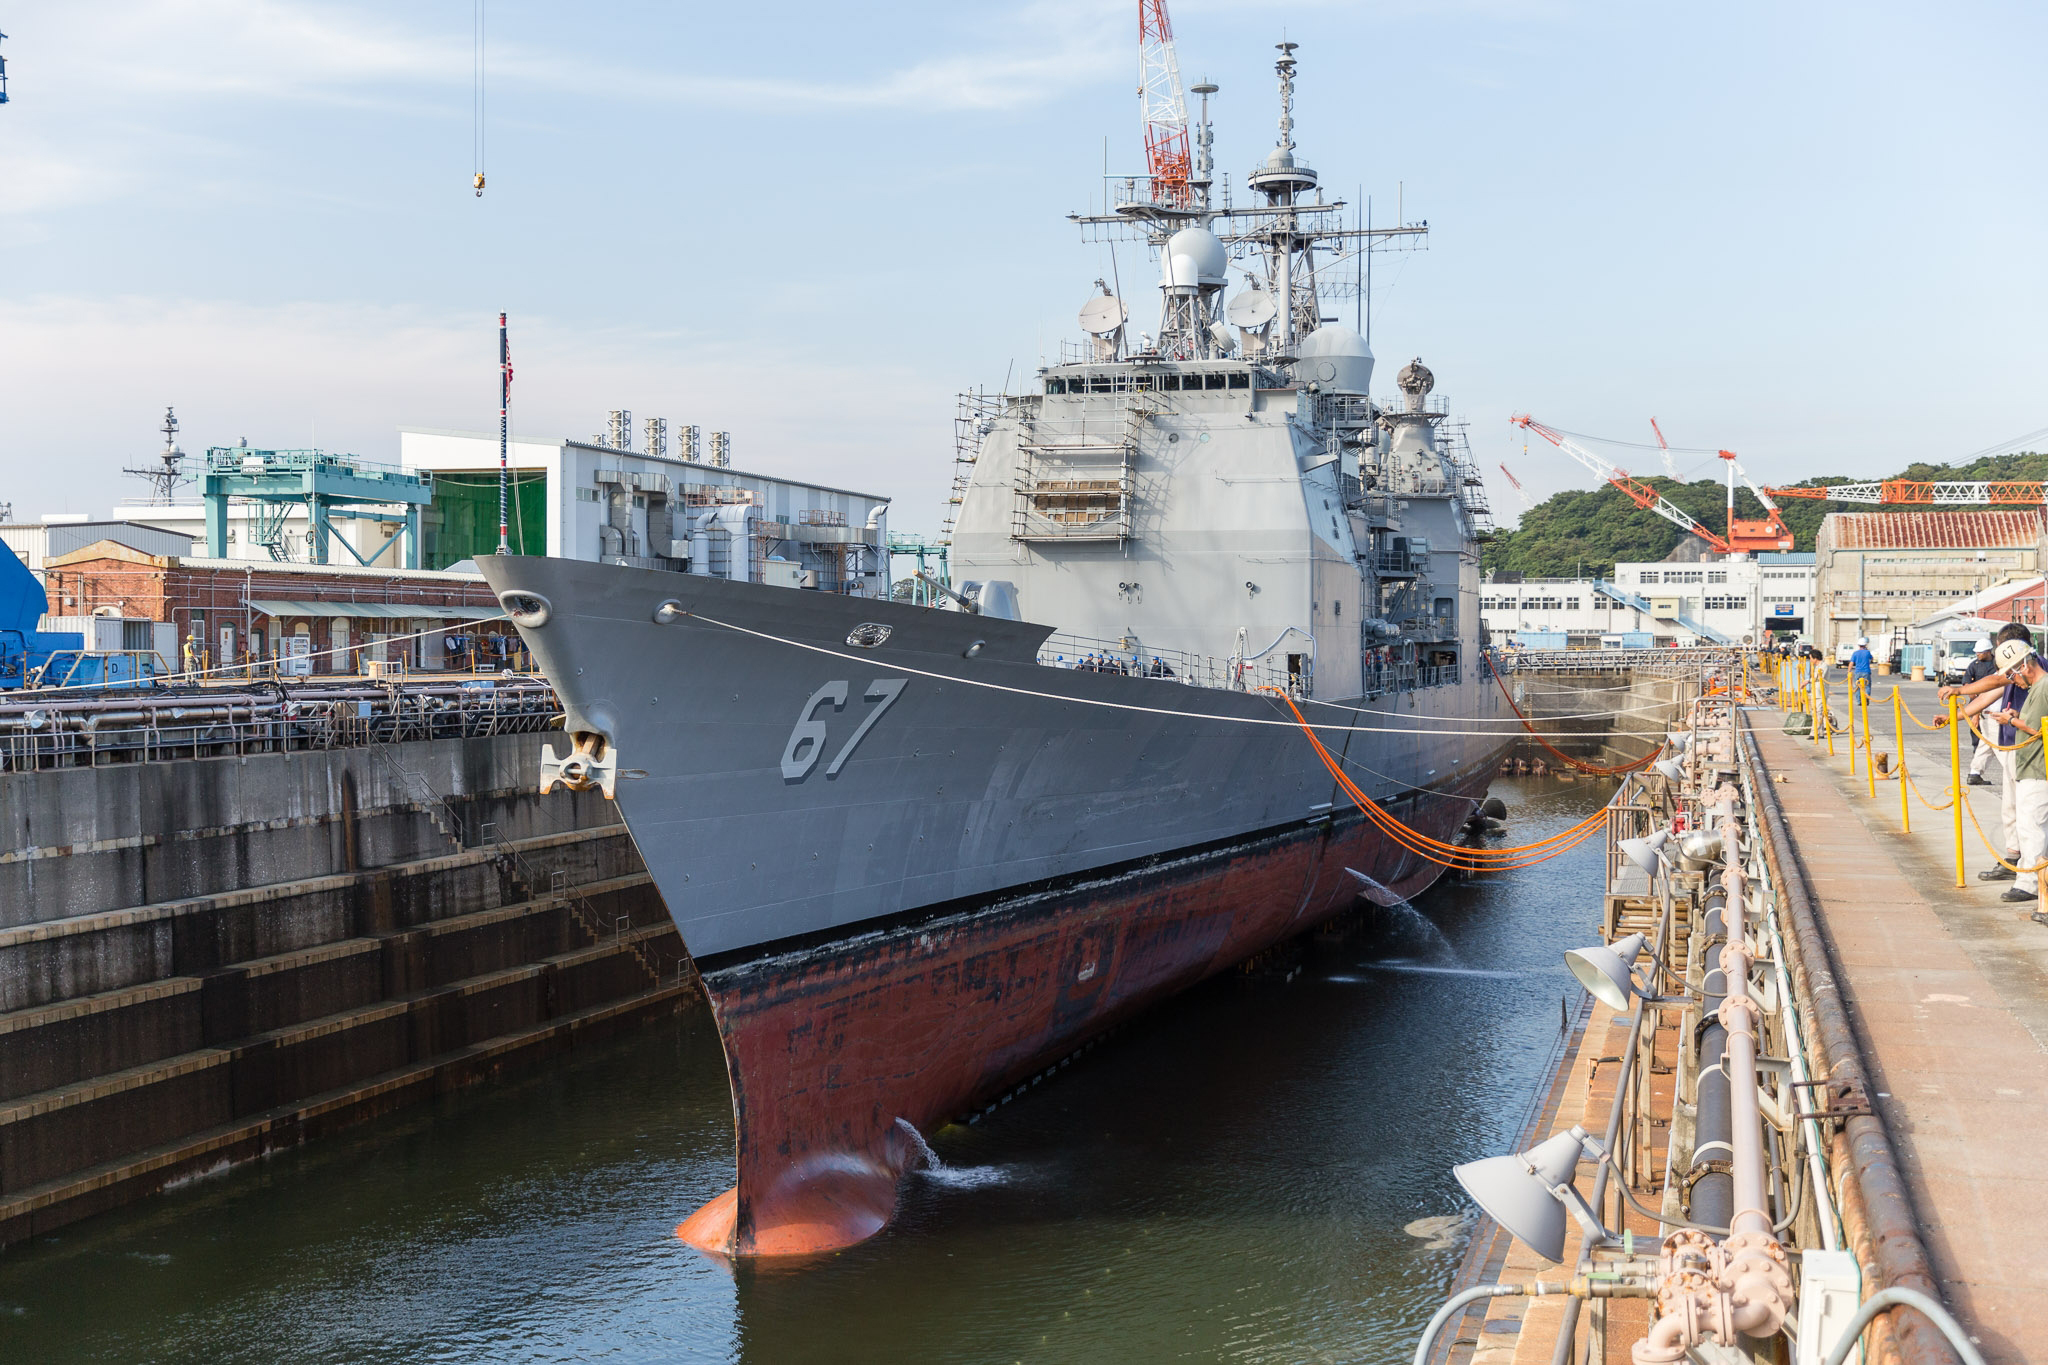 Water is drained from a dry dock at U.S. Naval Ship Repair Facility and Japan Regional Maintenance Center (SRF JRMC) Yokosuka preparing the Ticonderoga-class guided-missile cruiser USS Shiloh (CG 67) for a scheduled maintenance availability in July 2015. US Navy photo.